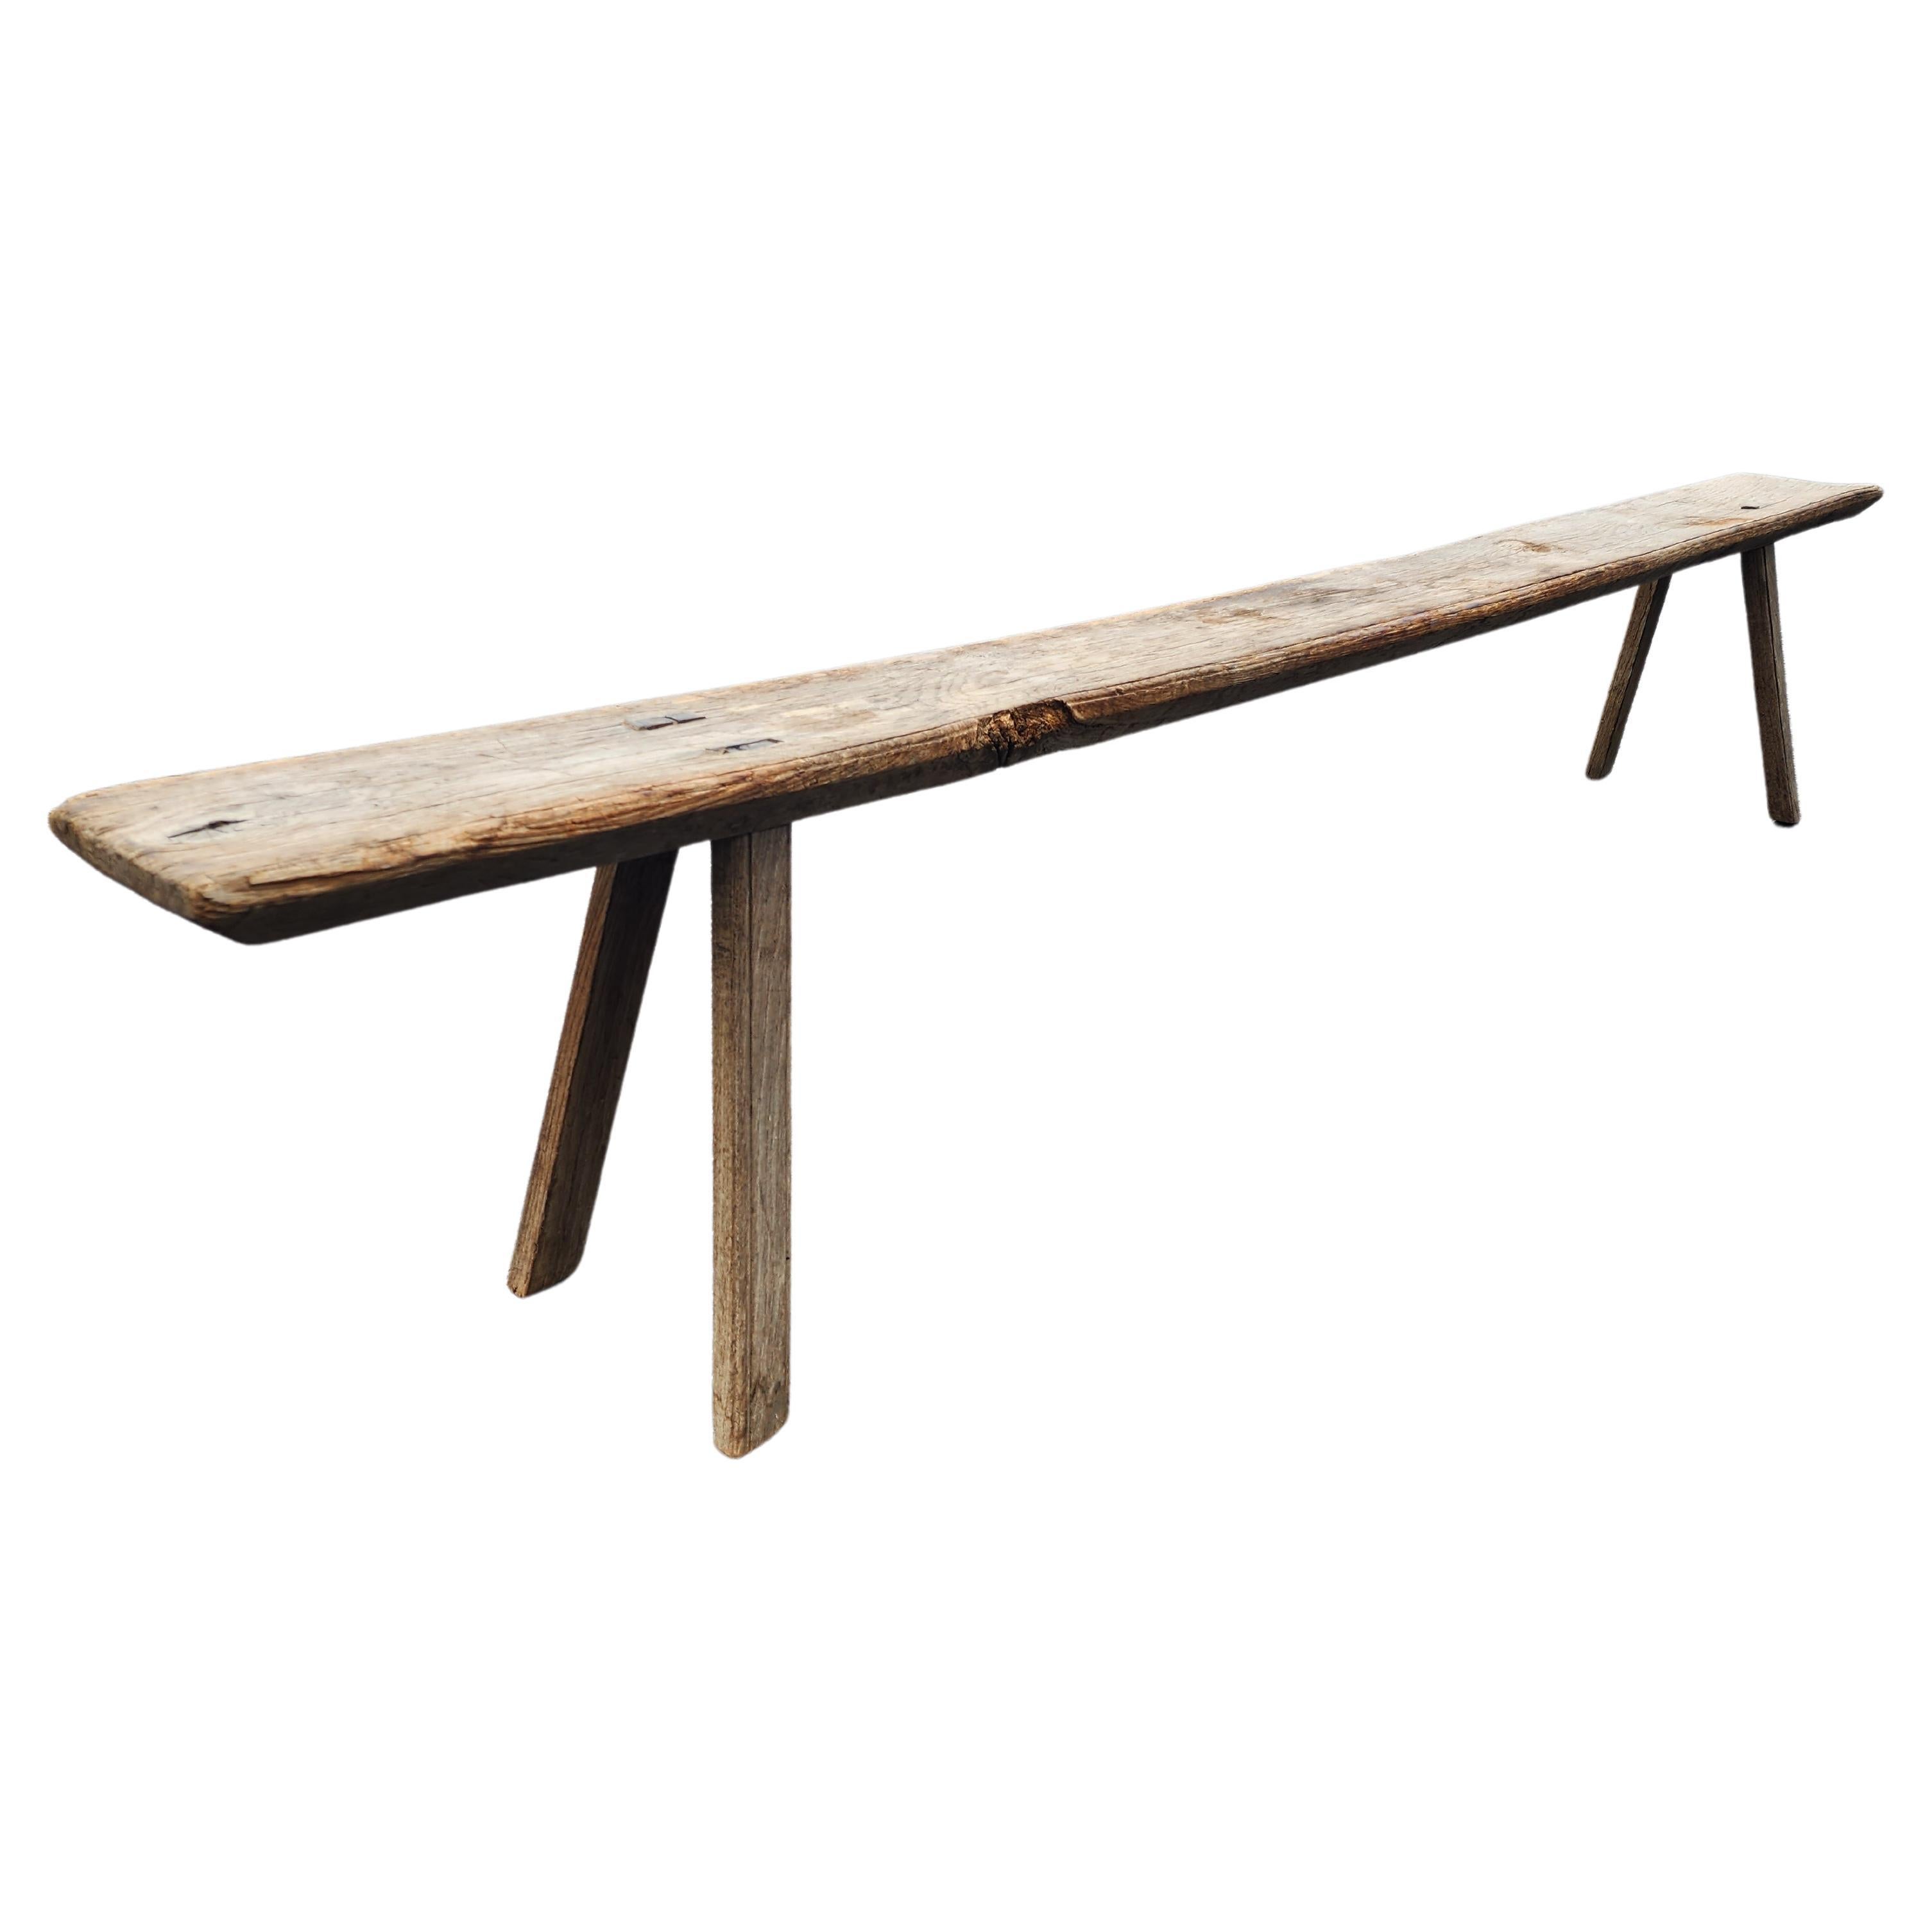 Fantastic french oak bench. Primitive and yet elegant in its simplicity and vernacular design. These benches had many uses, this one coming in at over one hundred inches in length must have had many. But nowadays they make the most excellent